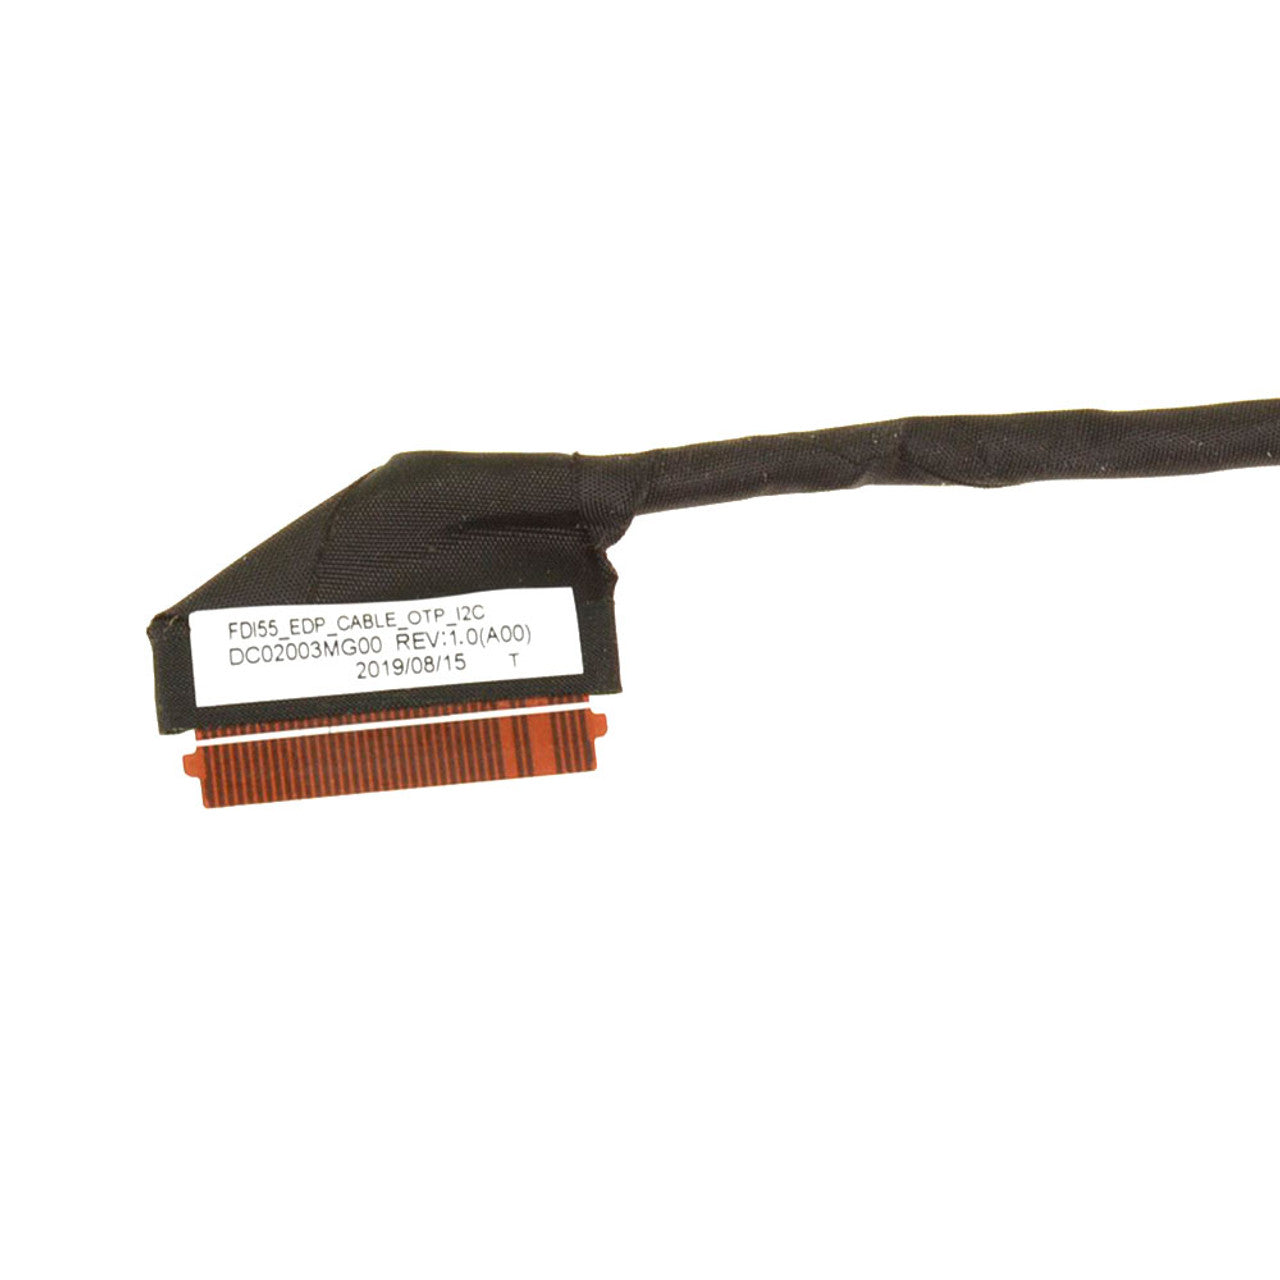 Dell New LCD LED LVDS EDP Display Video Cable Touch Screen Inspiron 15 5593 5594 Vostro 3500 3501 0YNDYW DC02003MG00 YNDYW